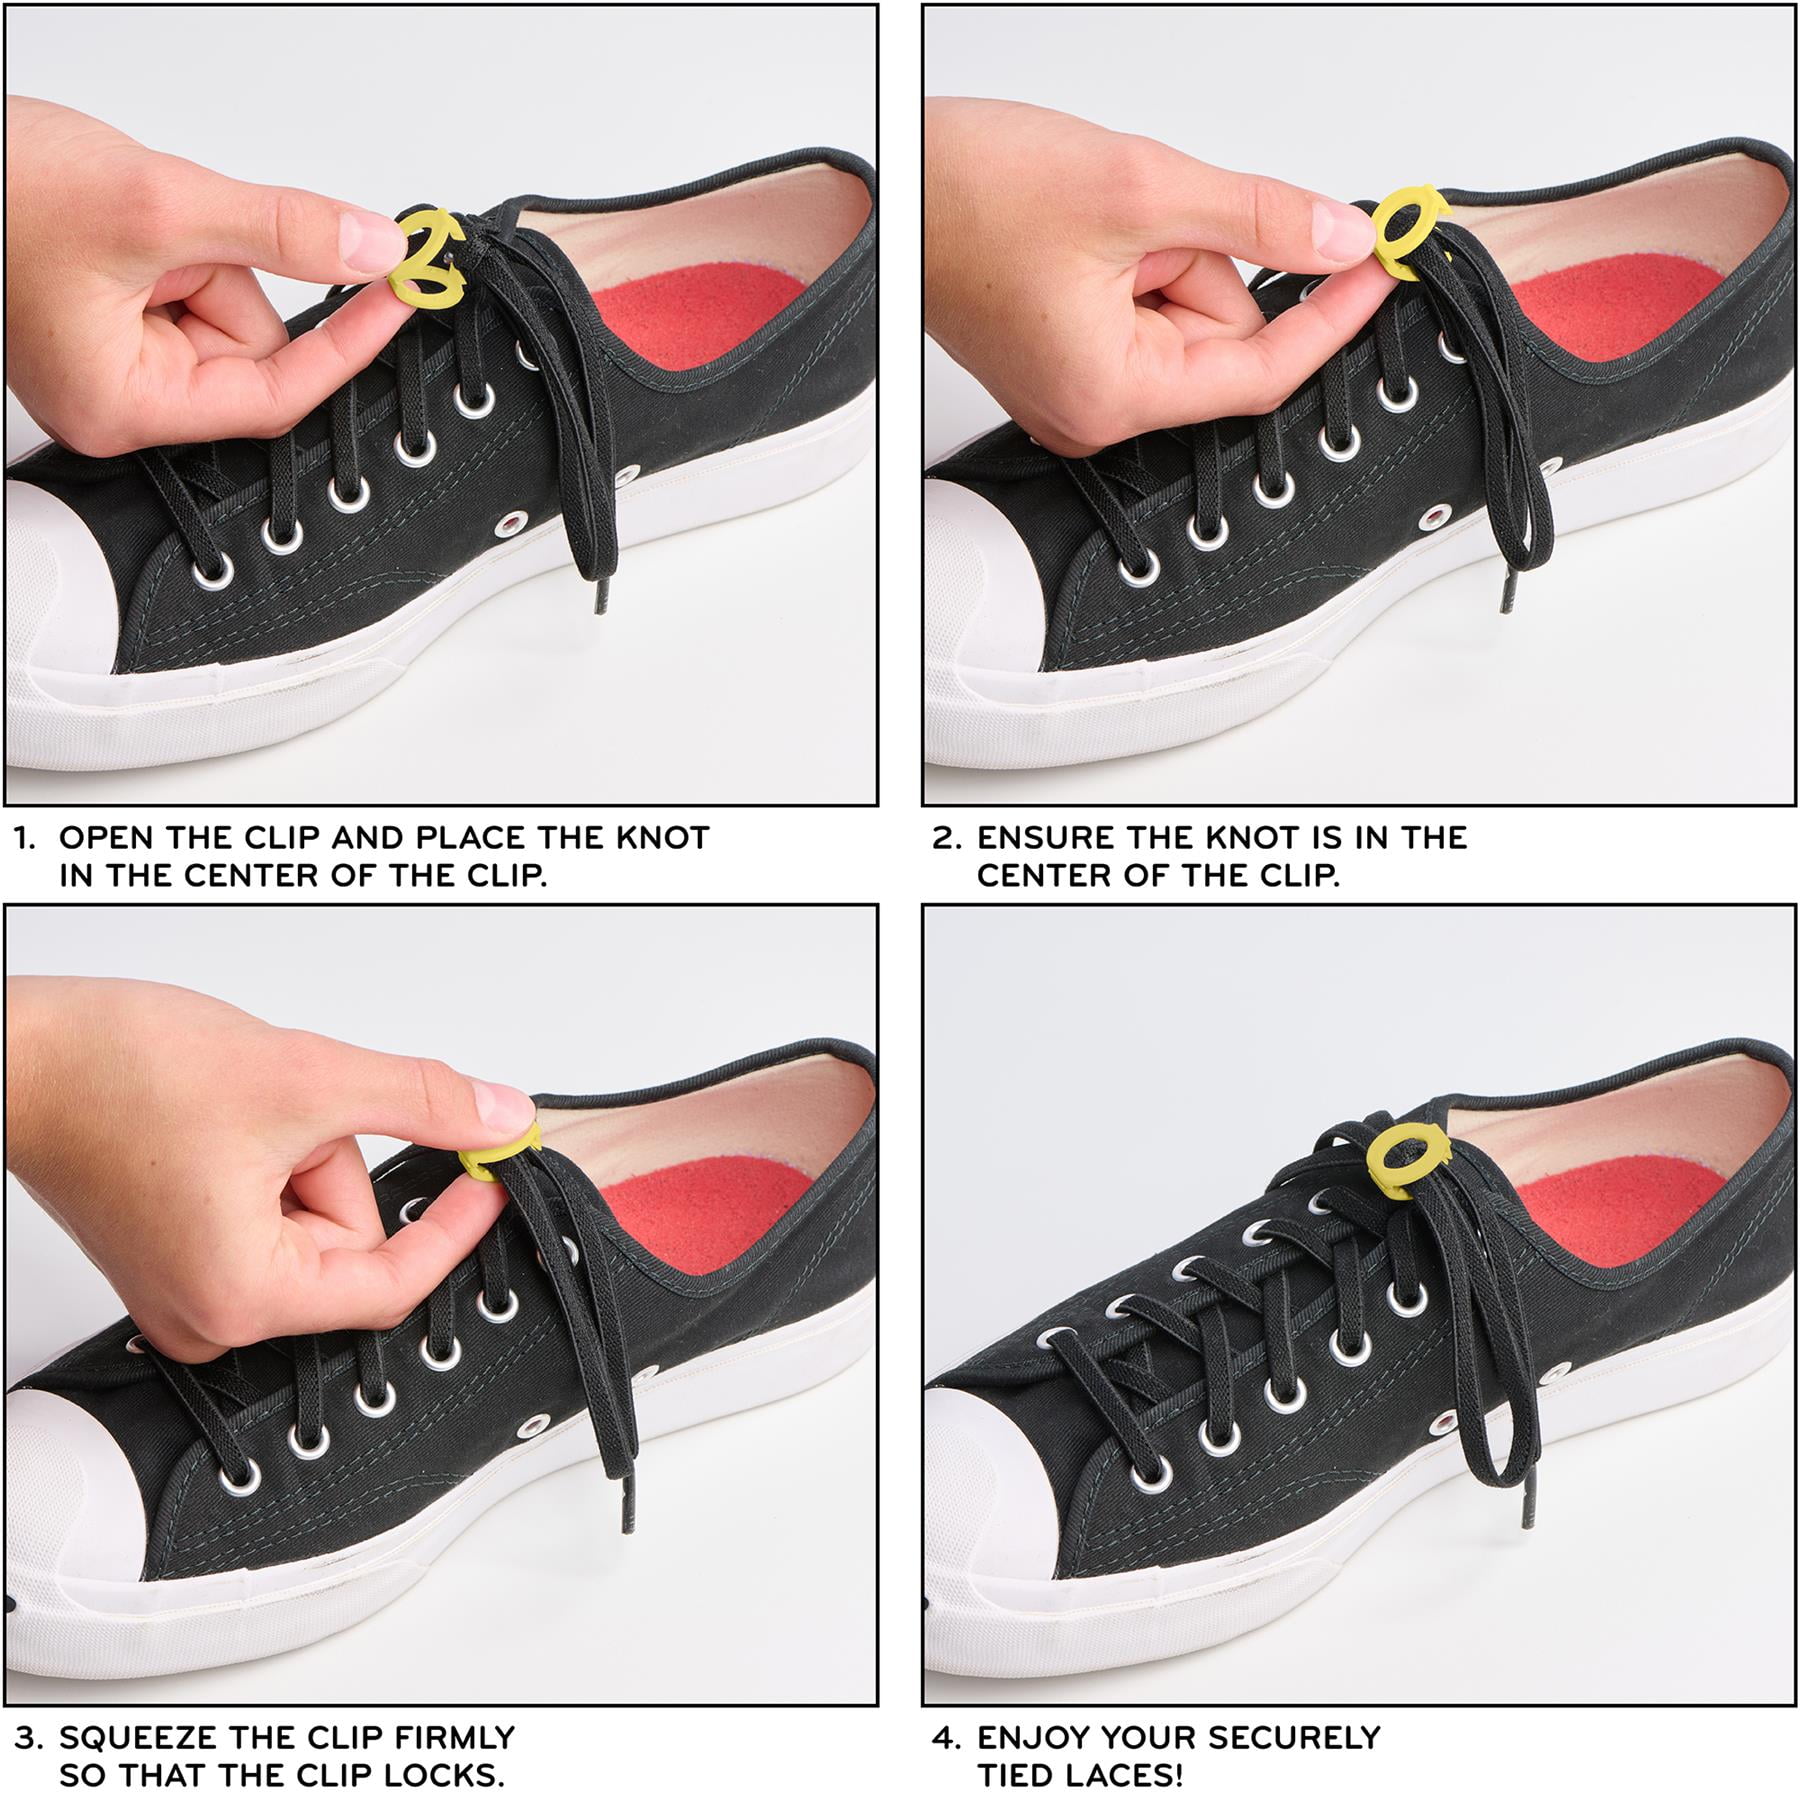 Shoelace Knot Clips by The Original Stretchlace